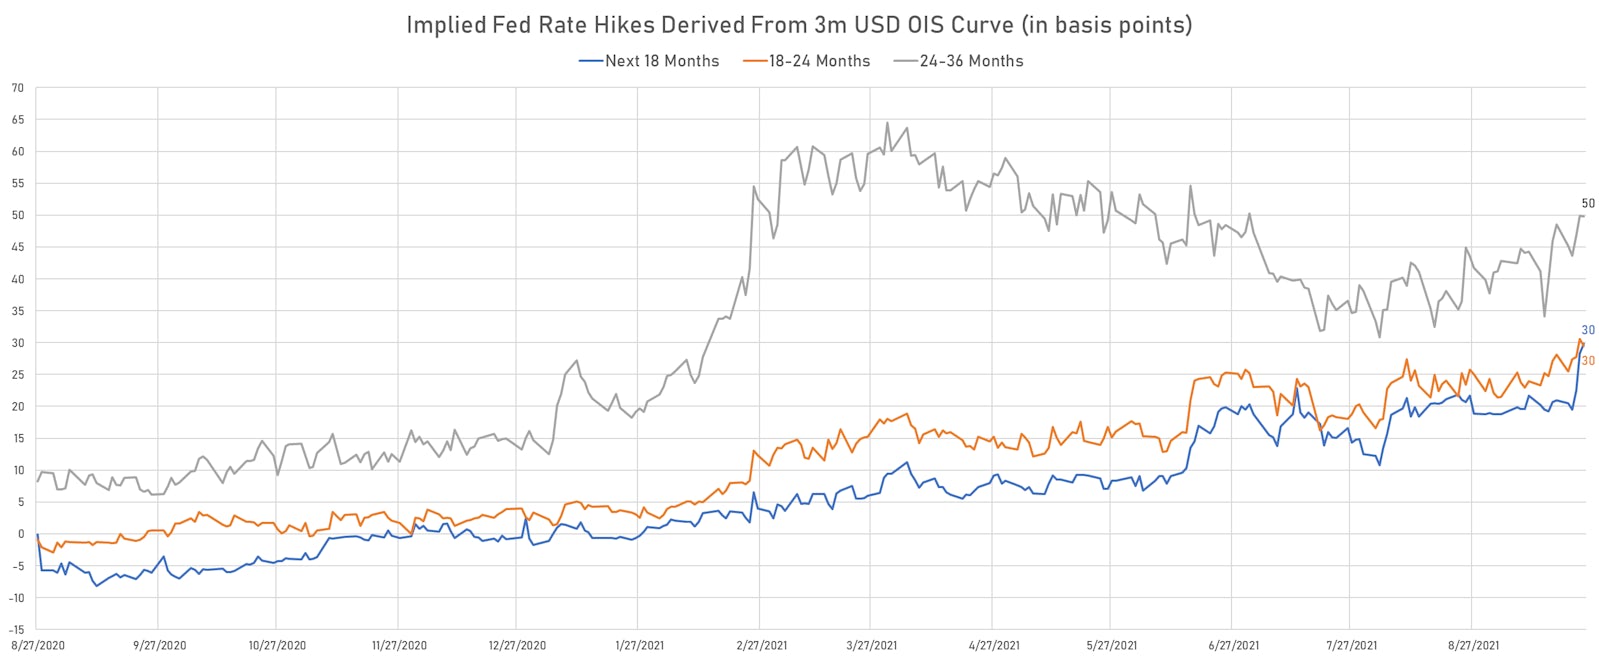 Implied Fed Hikes Over The Next 3 Years, Derived From 3m USD OIS Forward Rates | Sources: ϕpost, Refinitiv data